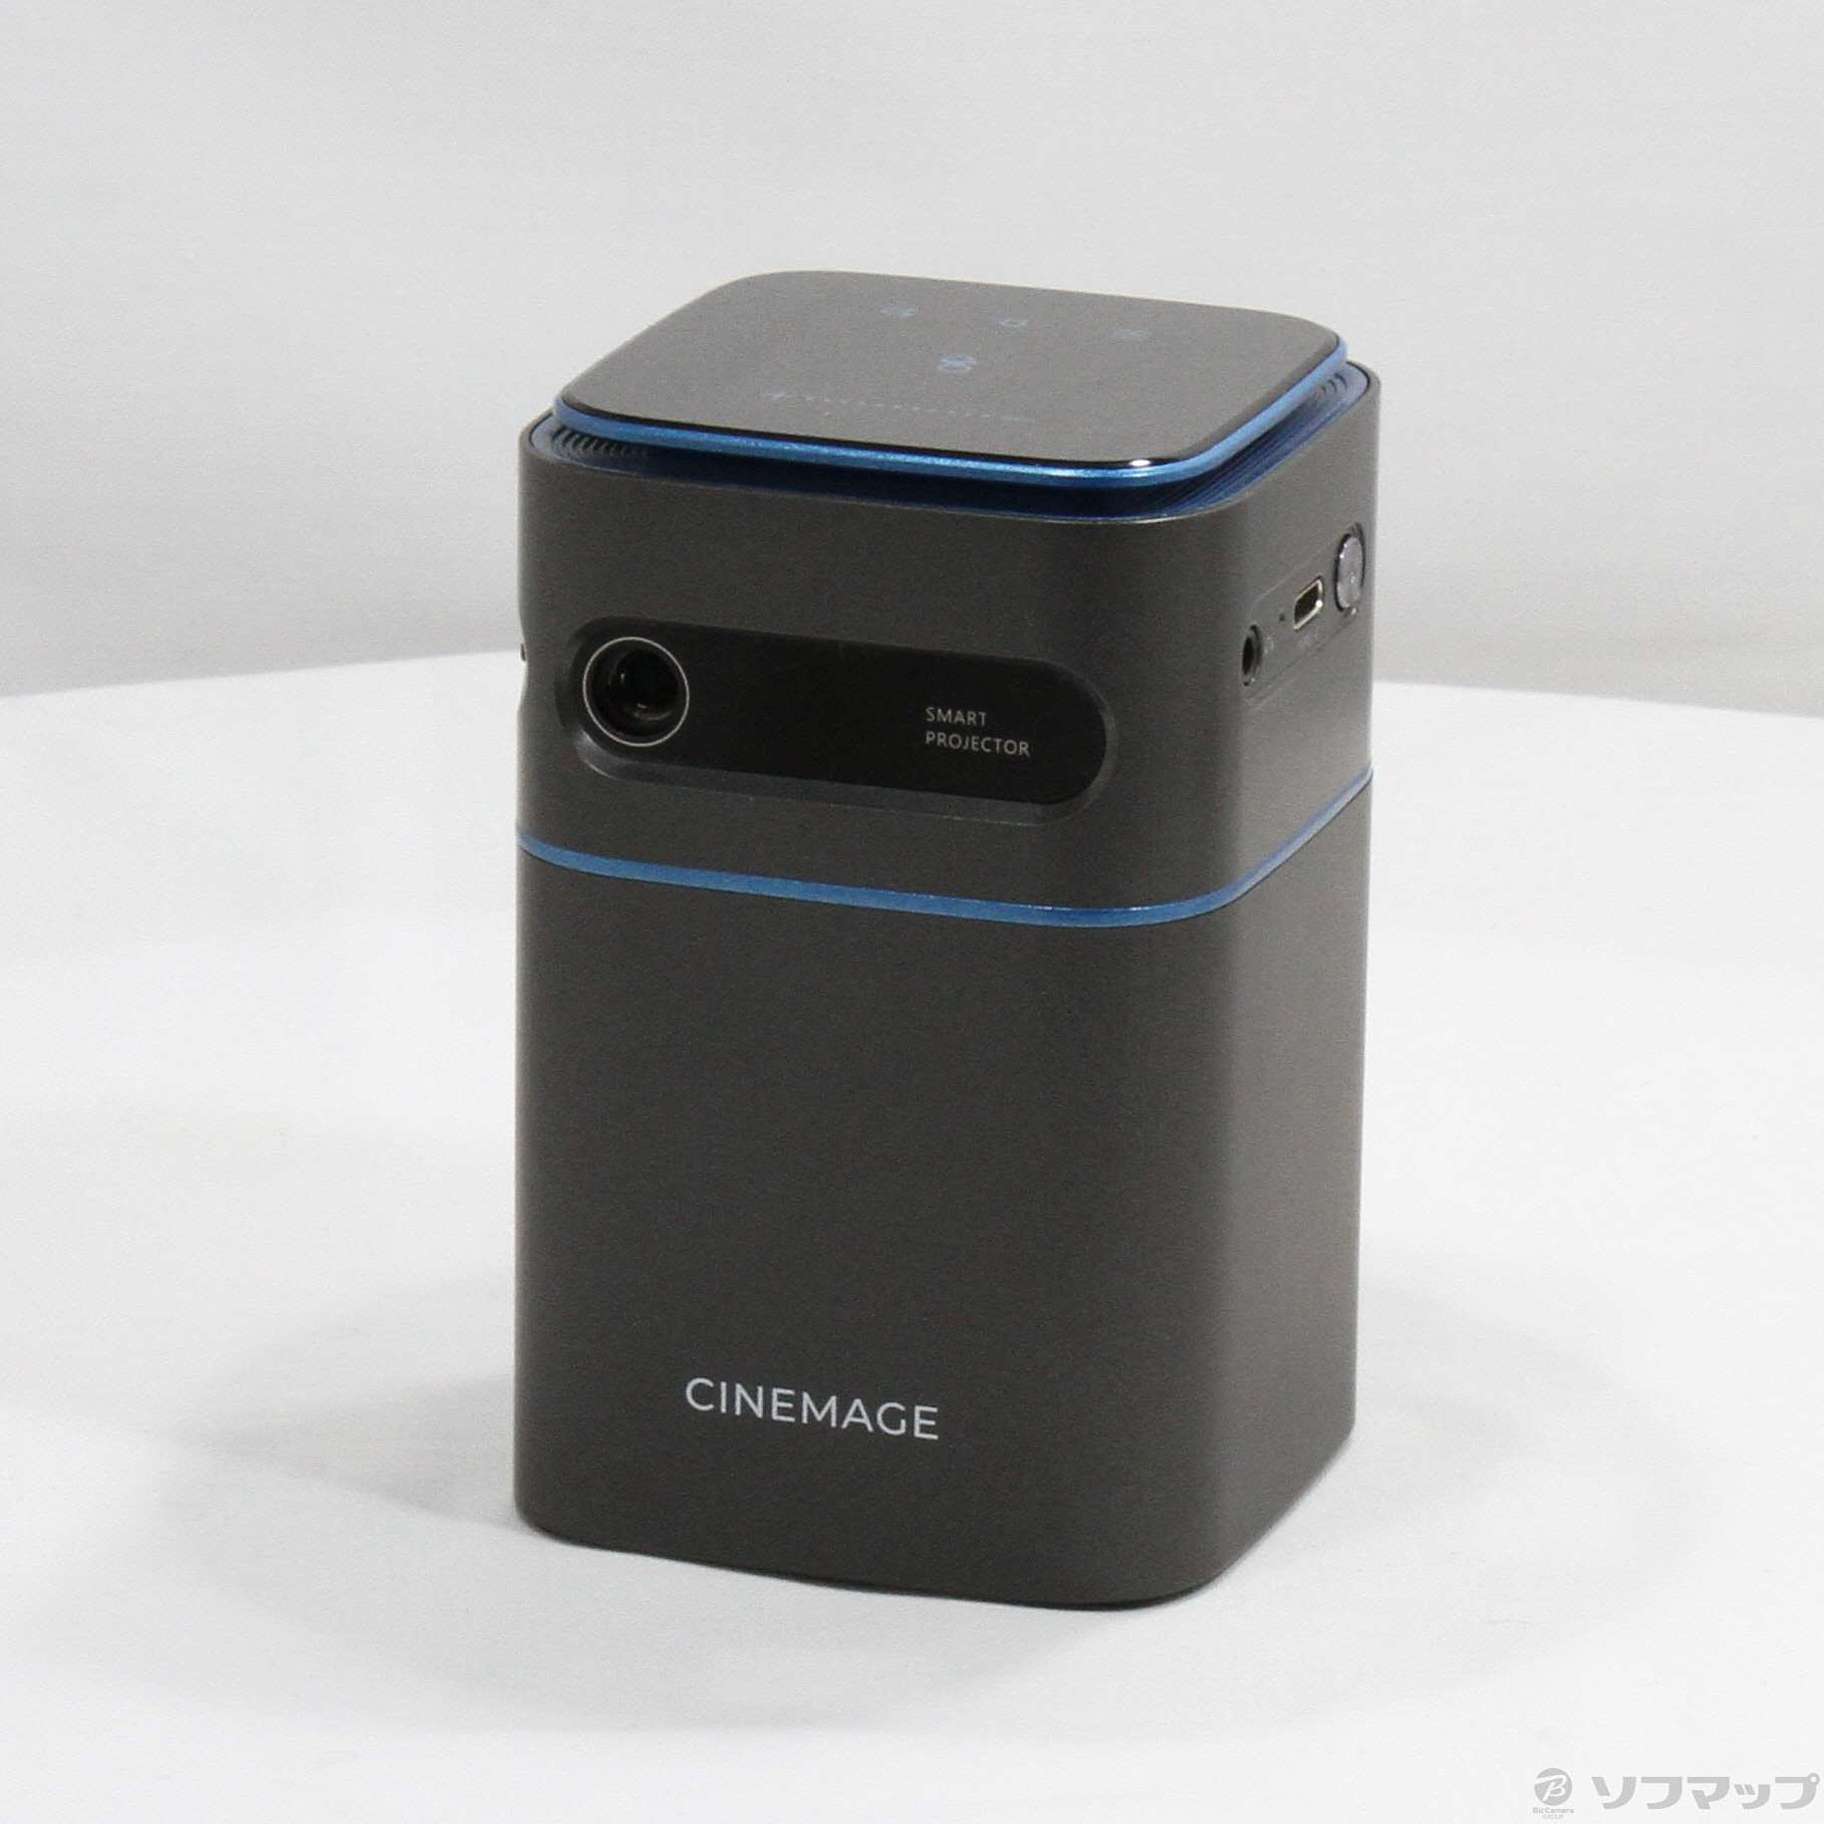 CINEMAGE mini 公式 プロジェクター 小型 家庭用 Android搭載 自動台形 